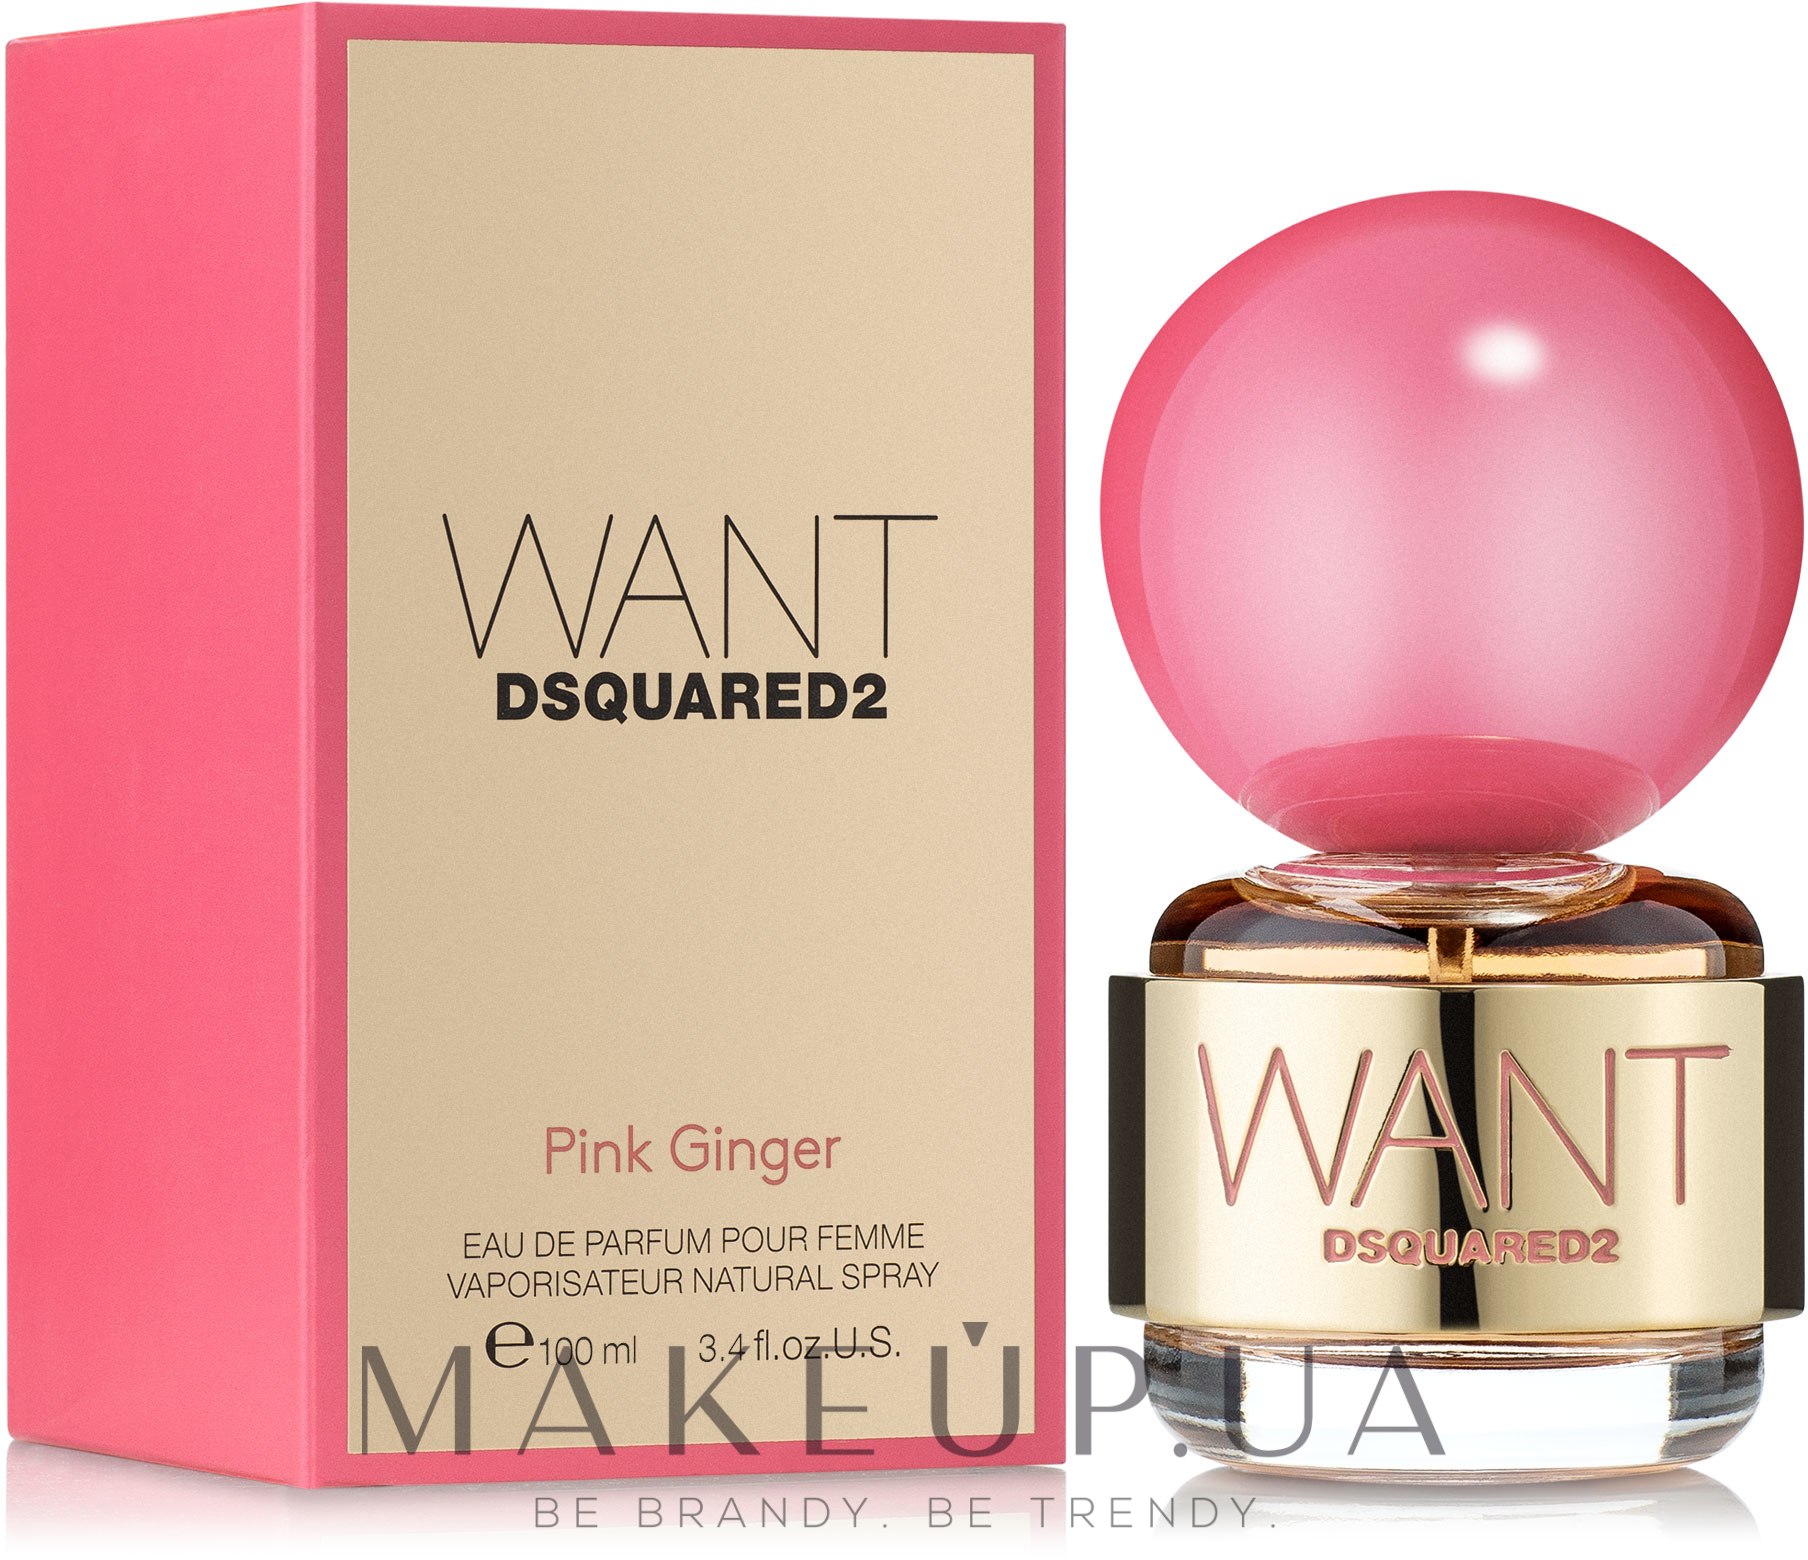 Духи want dsquared2 want Pink. Dsquared2 want Pink Ginger. Вода wanted. Dsquared2 want Pink Ginger купить.